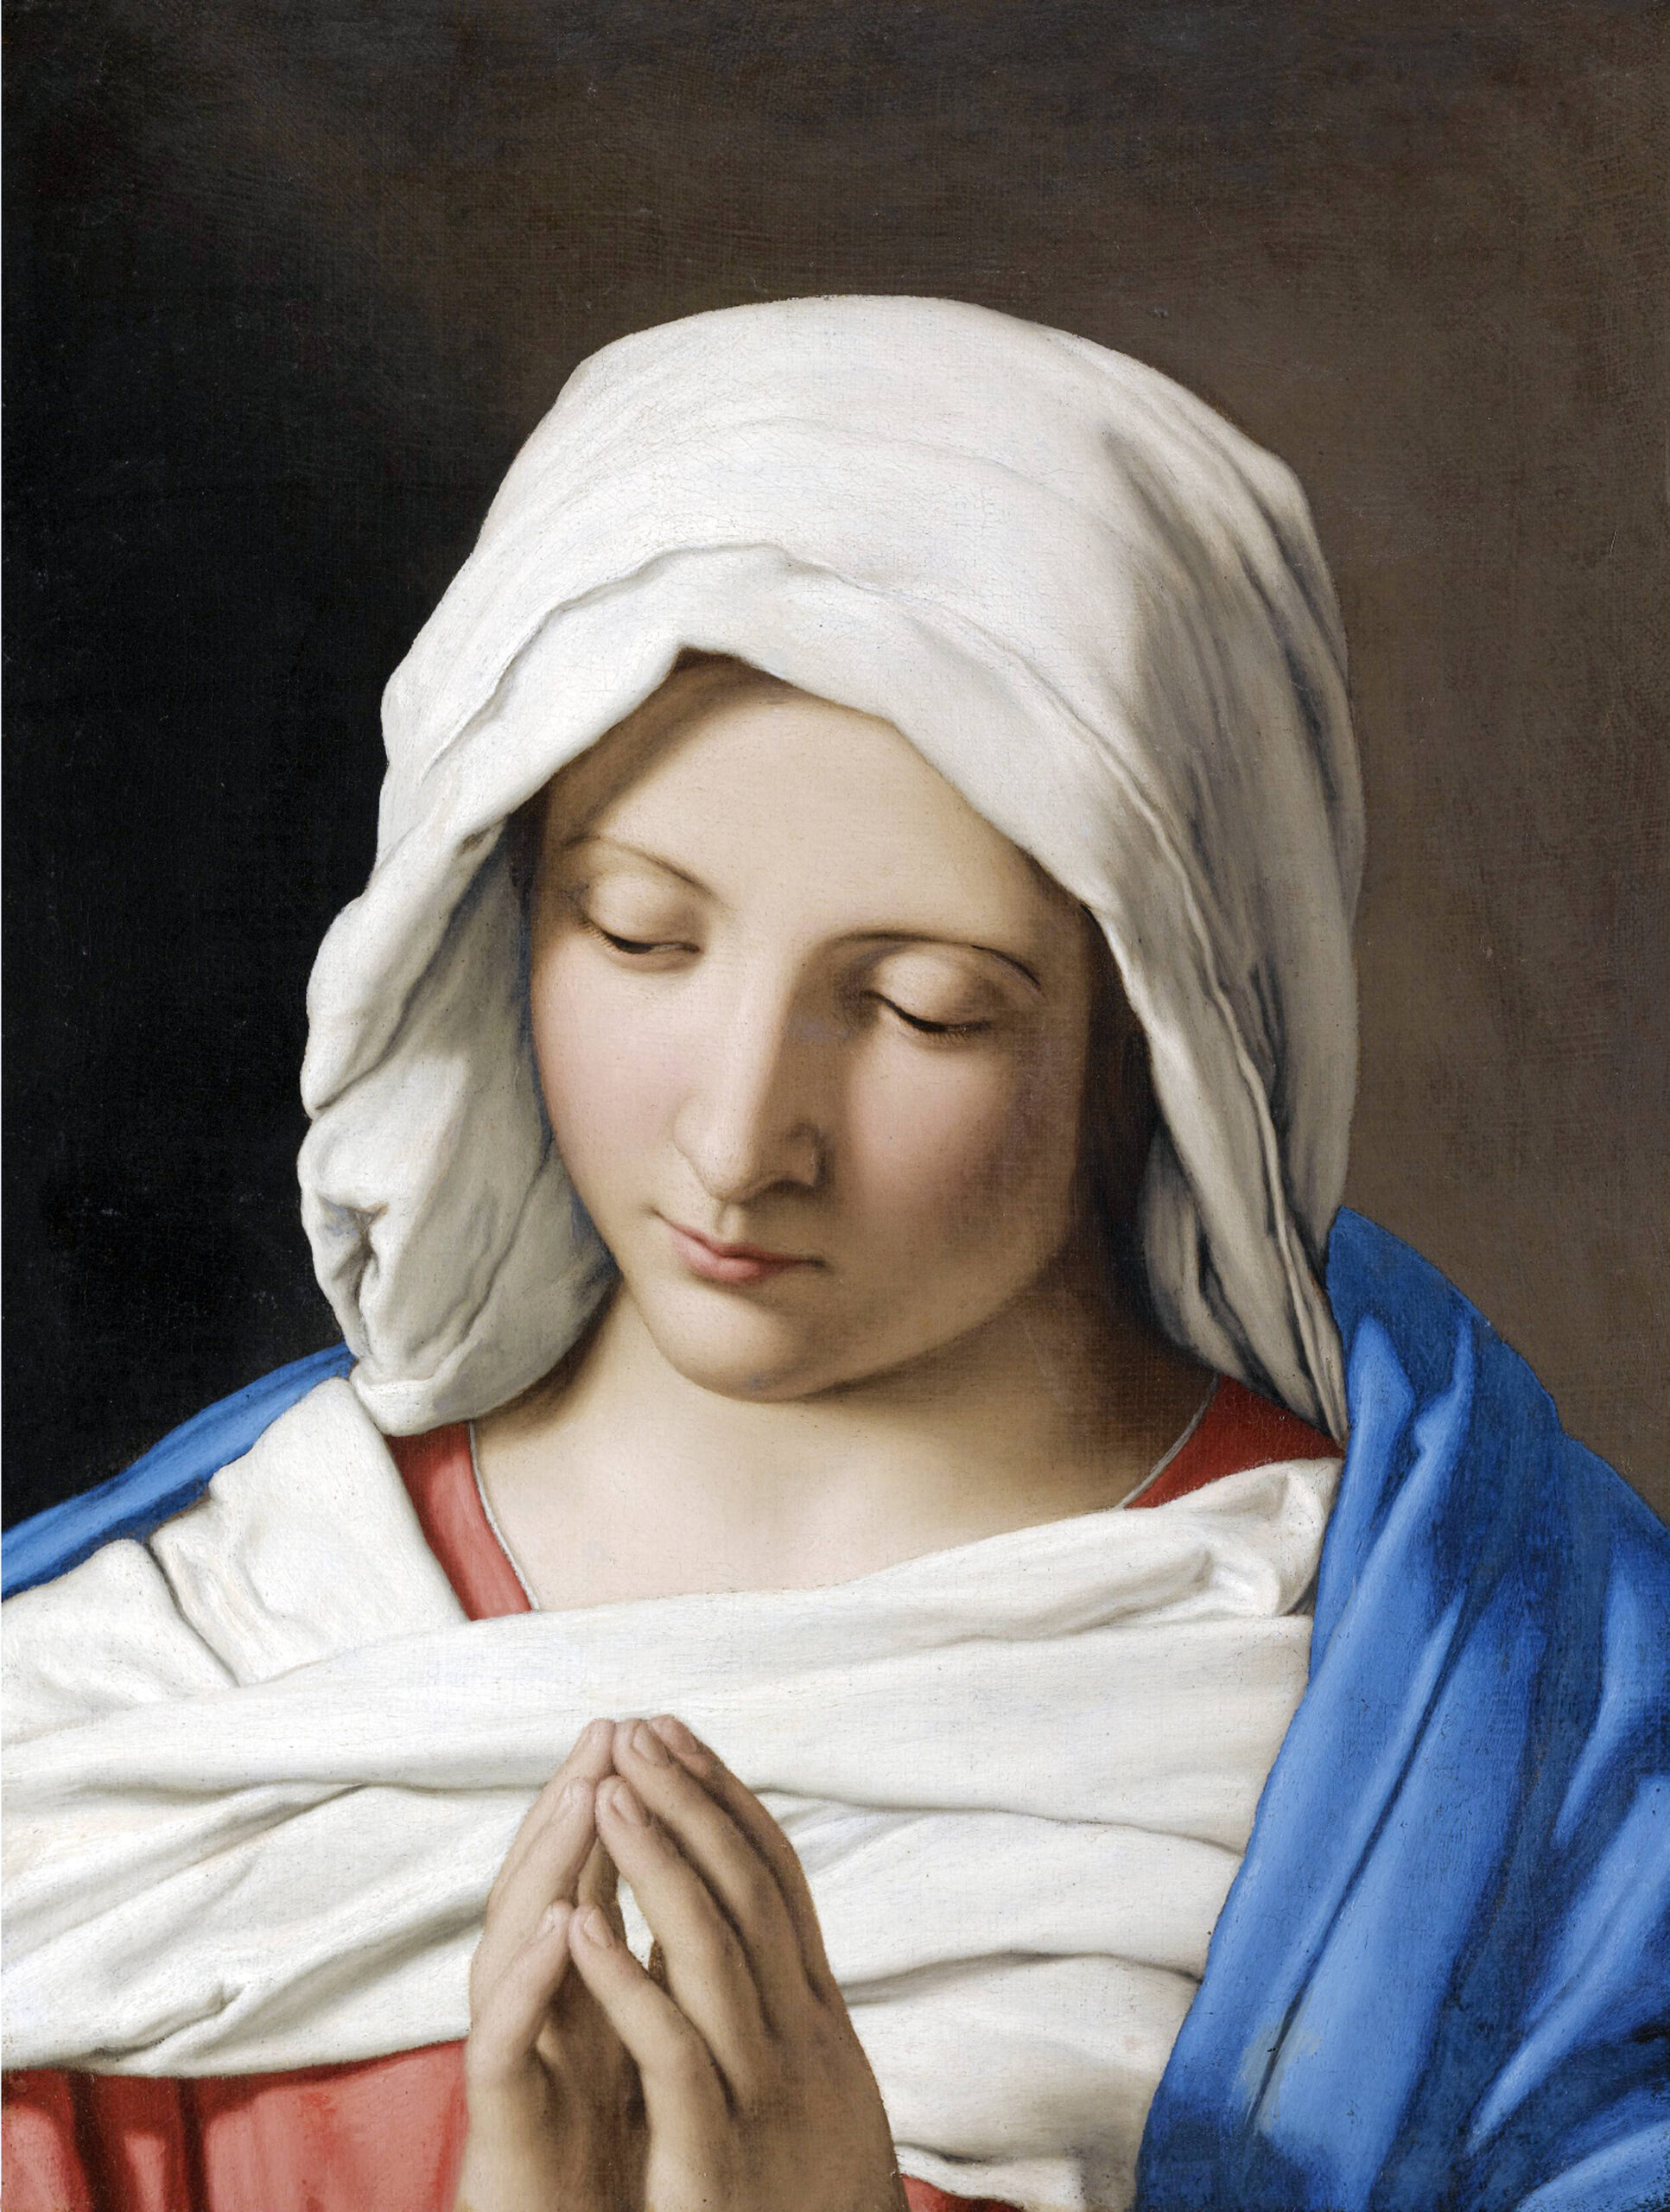 Let us honour Mary throughout the month of May